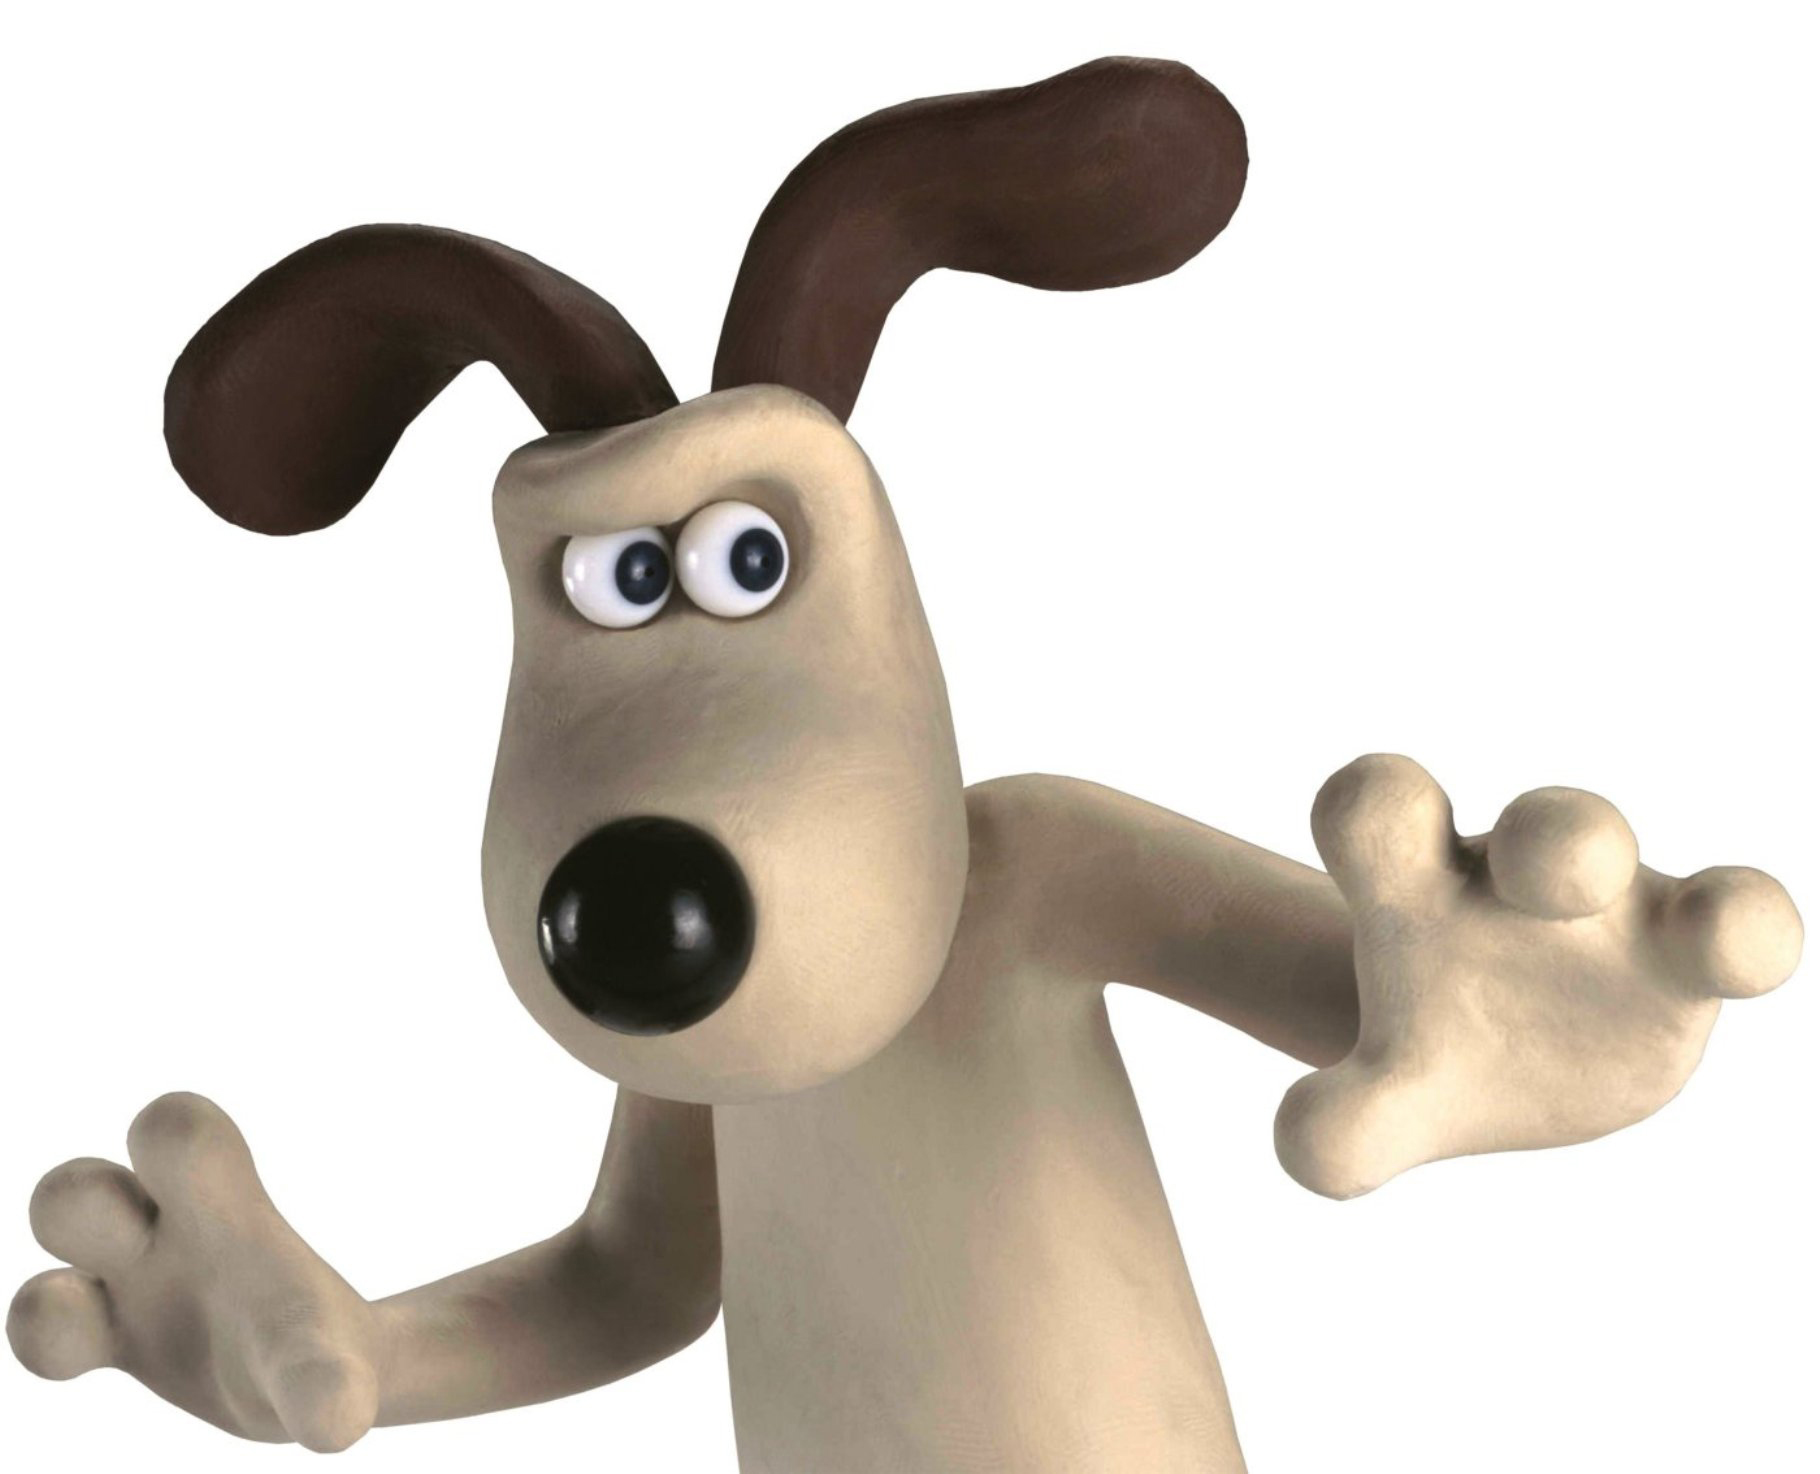 Gromit | Wallace and Gromit Wiki | FANDOM powered by Wikia